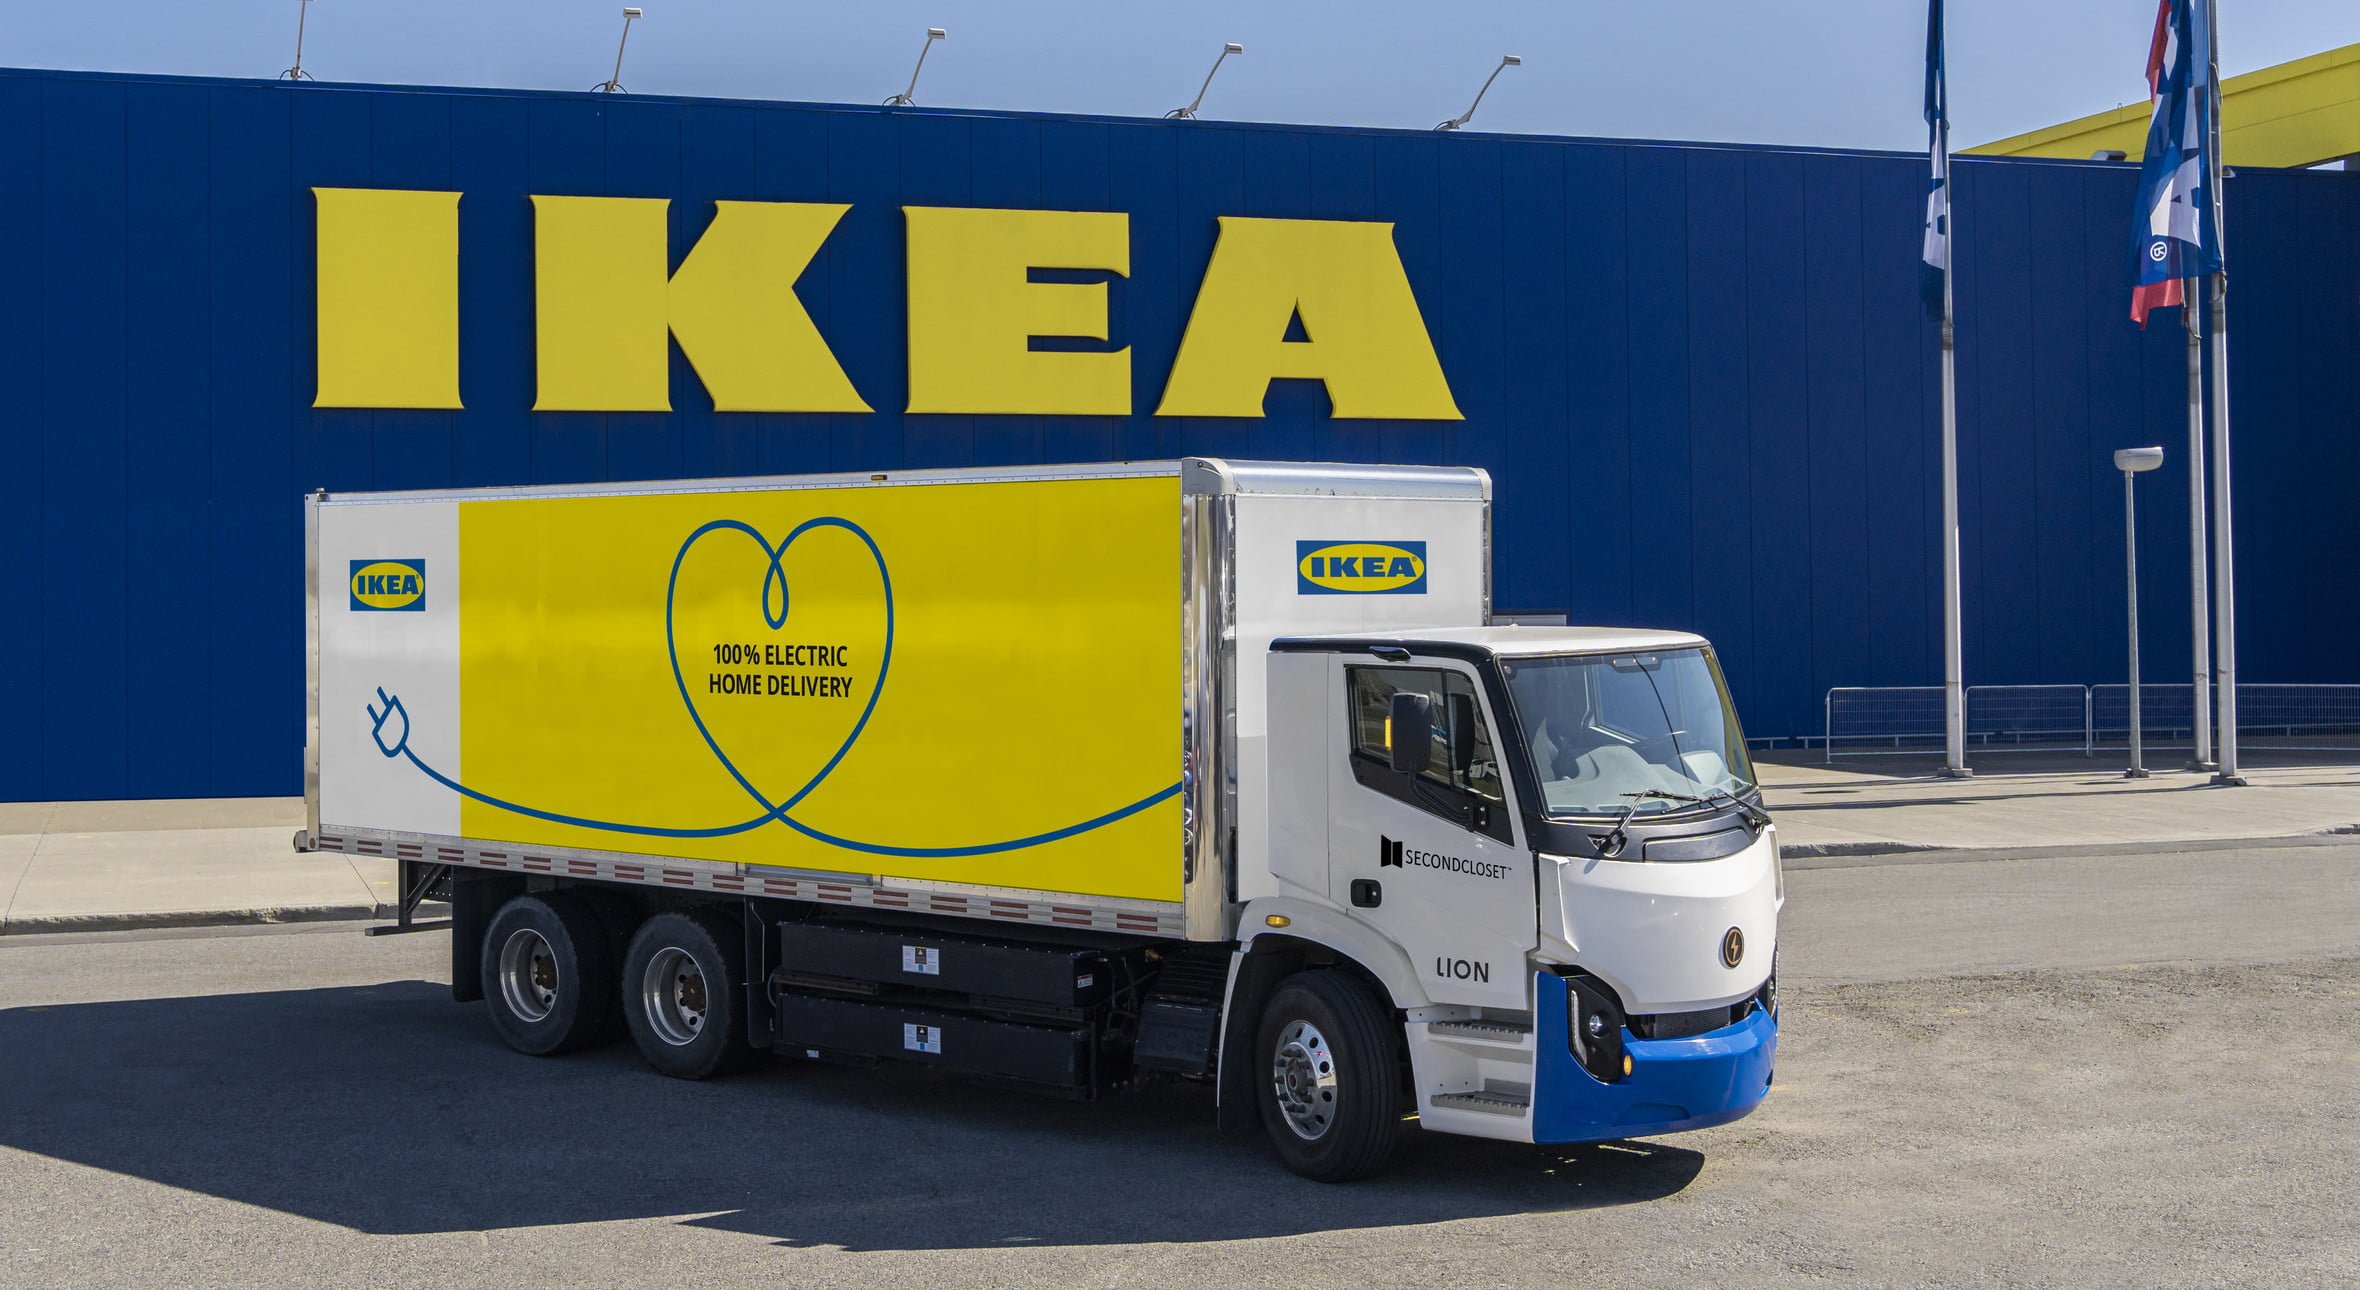 IKEA Canada Announces Electric Vehicle Last Mile Delivery [Interview]